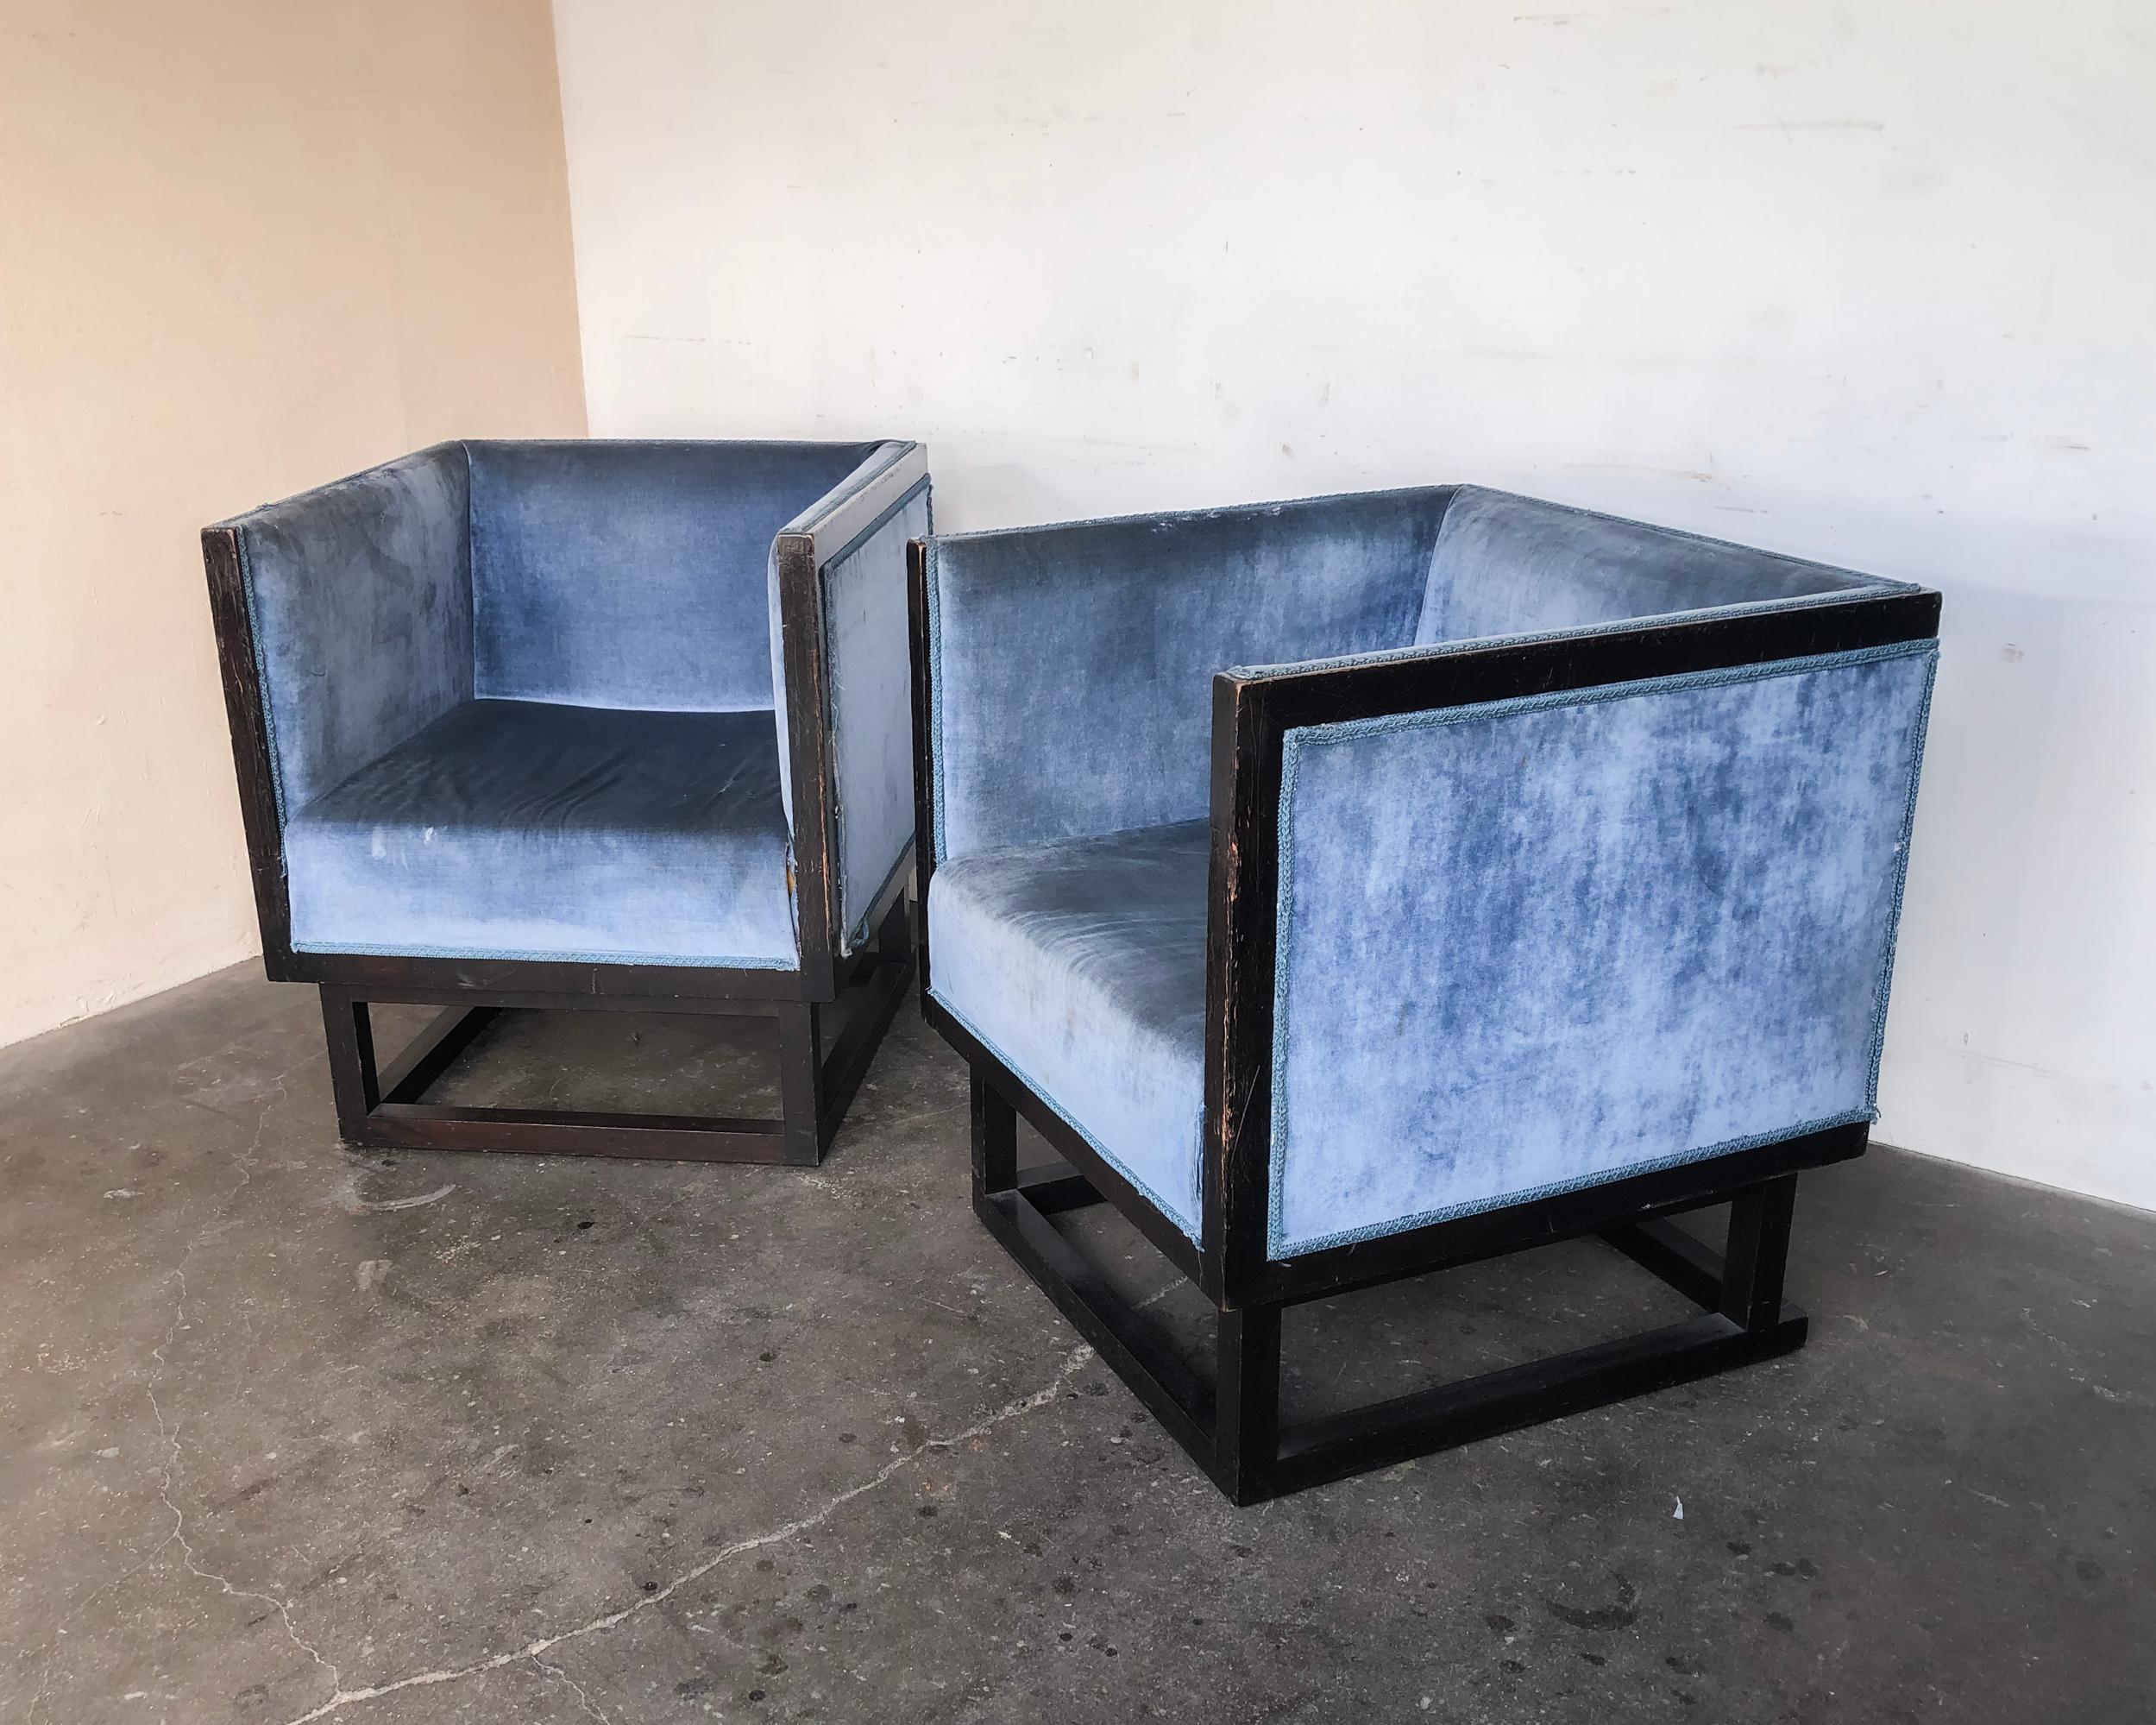 Pair of rare original 'Cabinet Chairs' by Josef Hoffmann handmade circa 1980s by Wittmann Austria. Designed in 1903, for the Vienna home of Dr. Salzer, Josef Hoffmann's cabinet chairs are a timeless design. The rationalist cube form is made